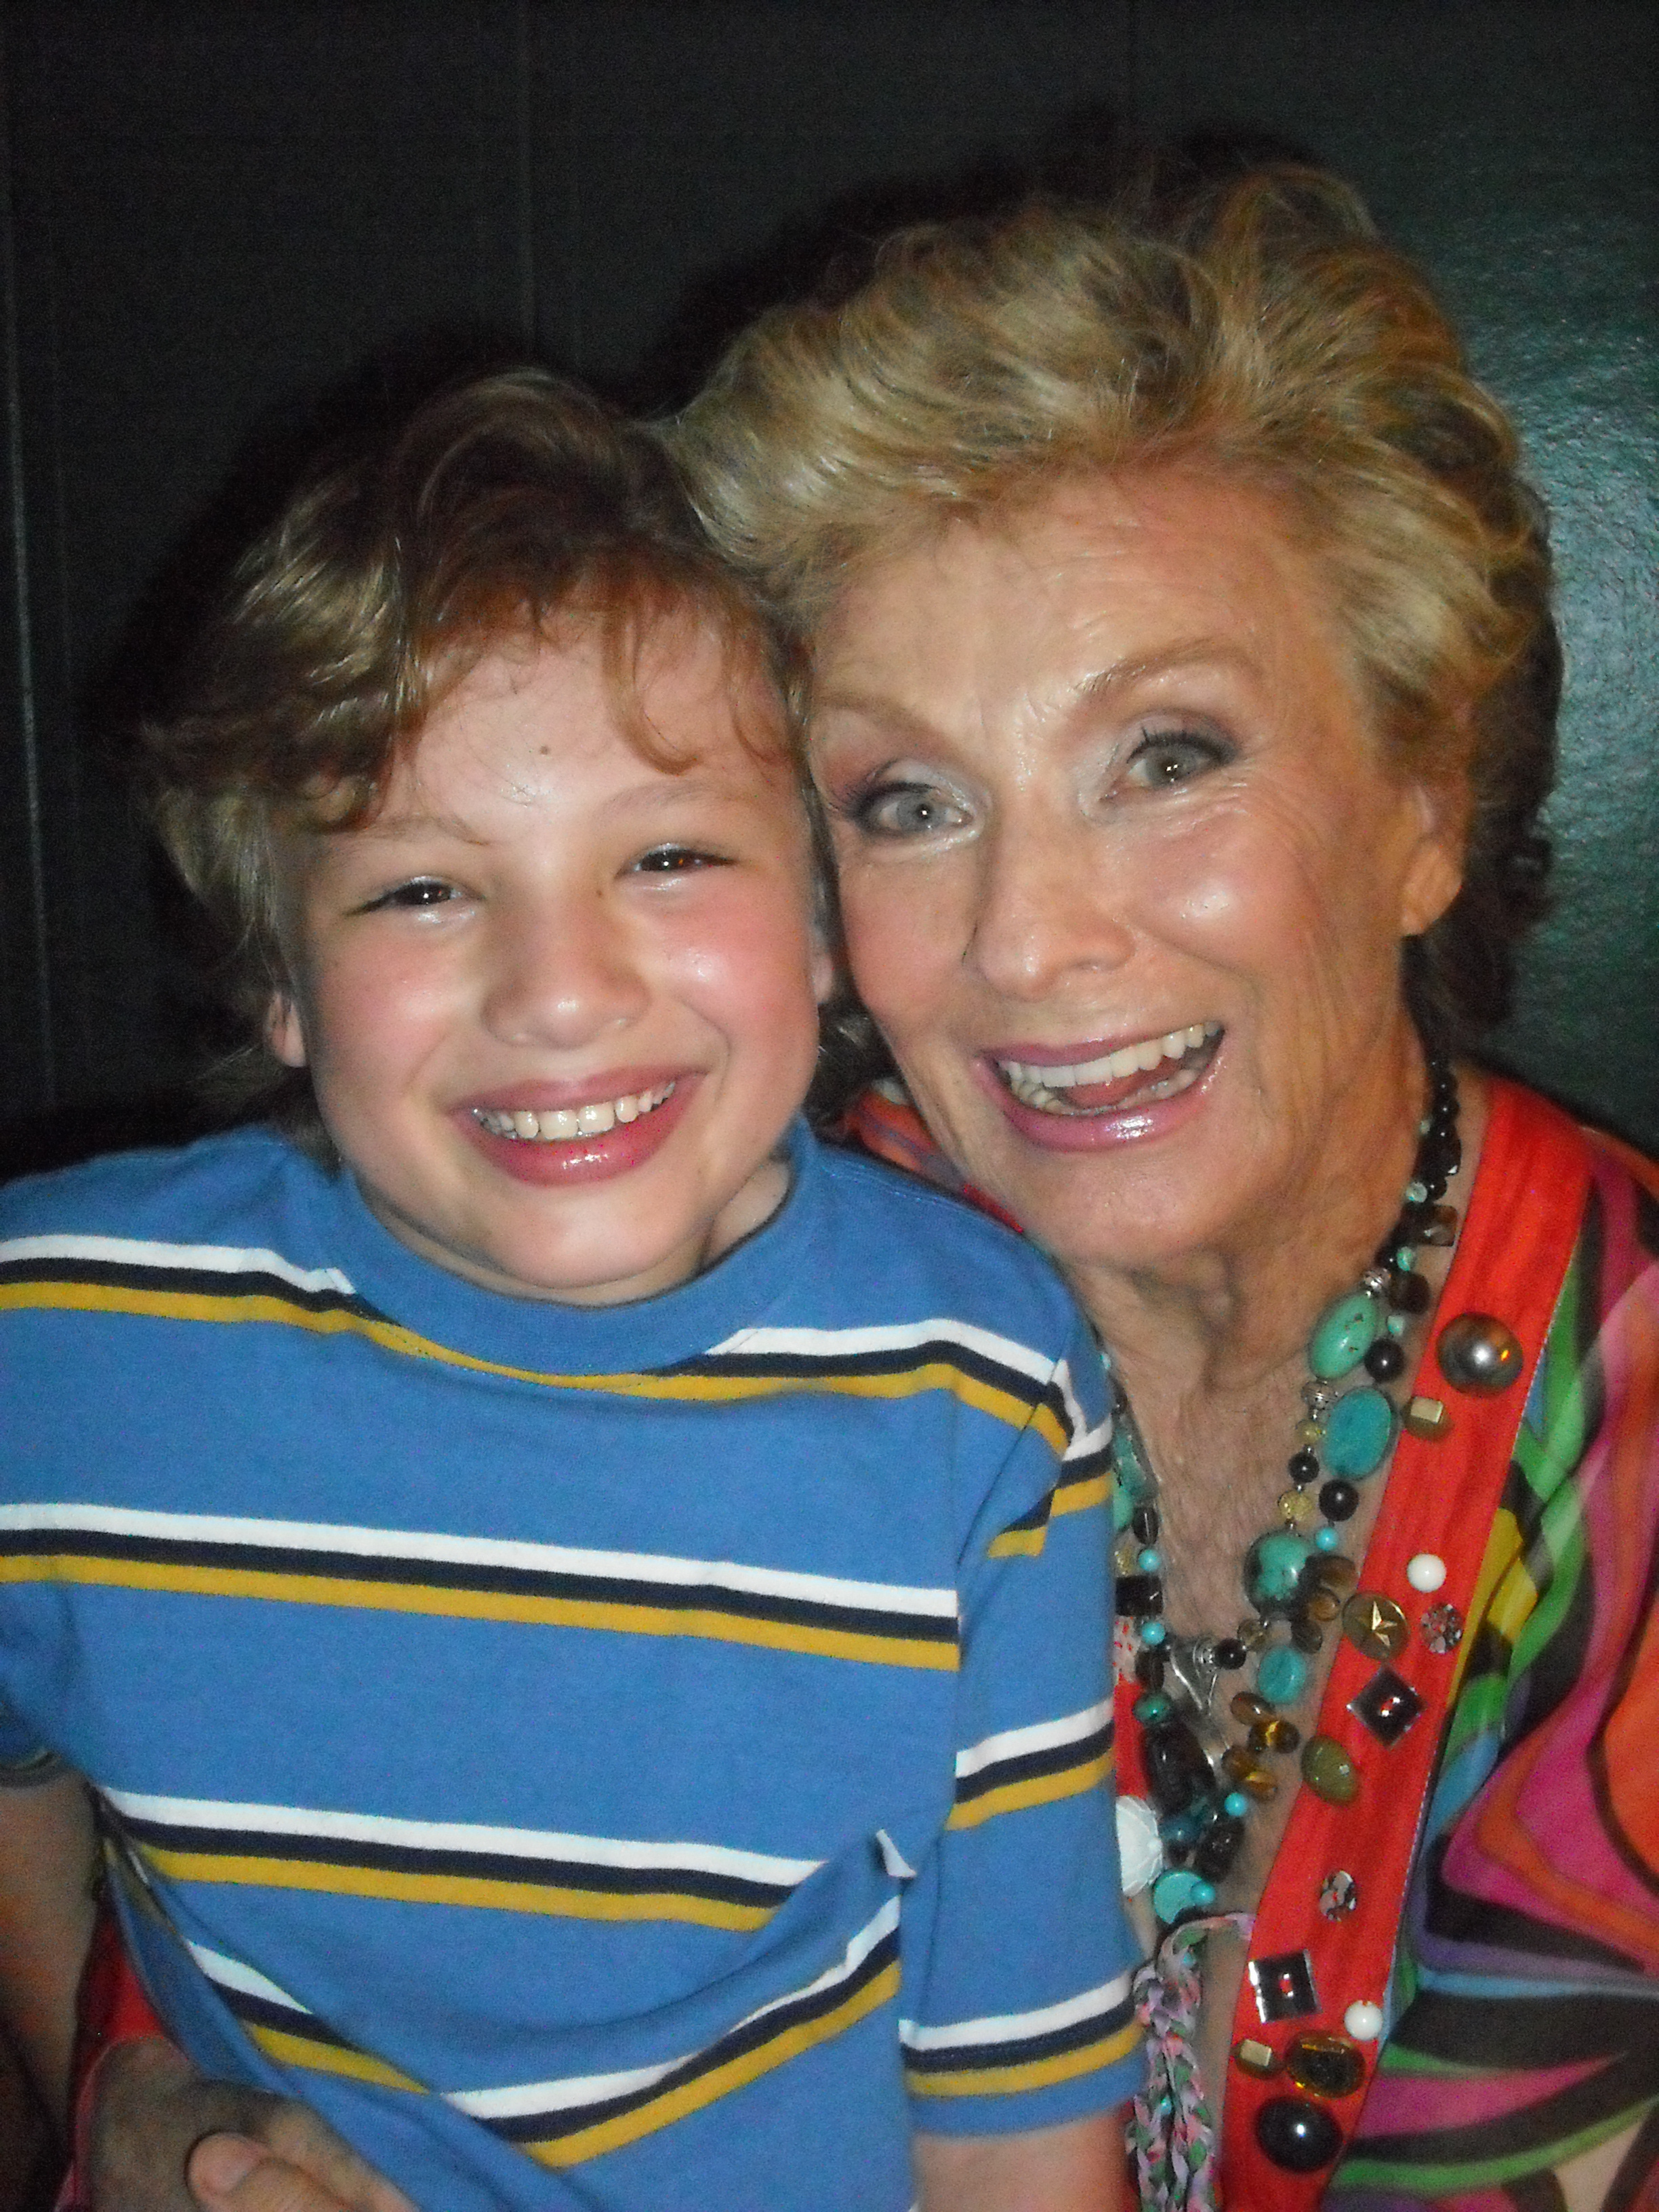 Max with Miss Cloris Leachman on the 